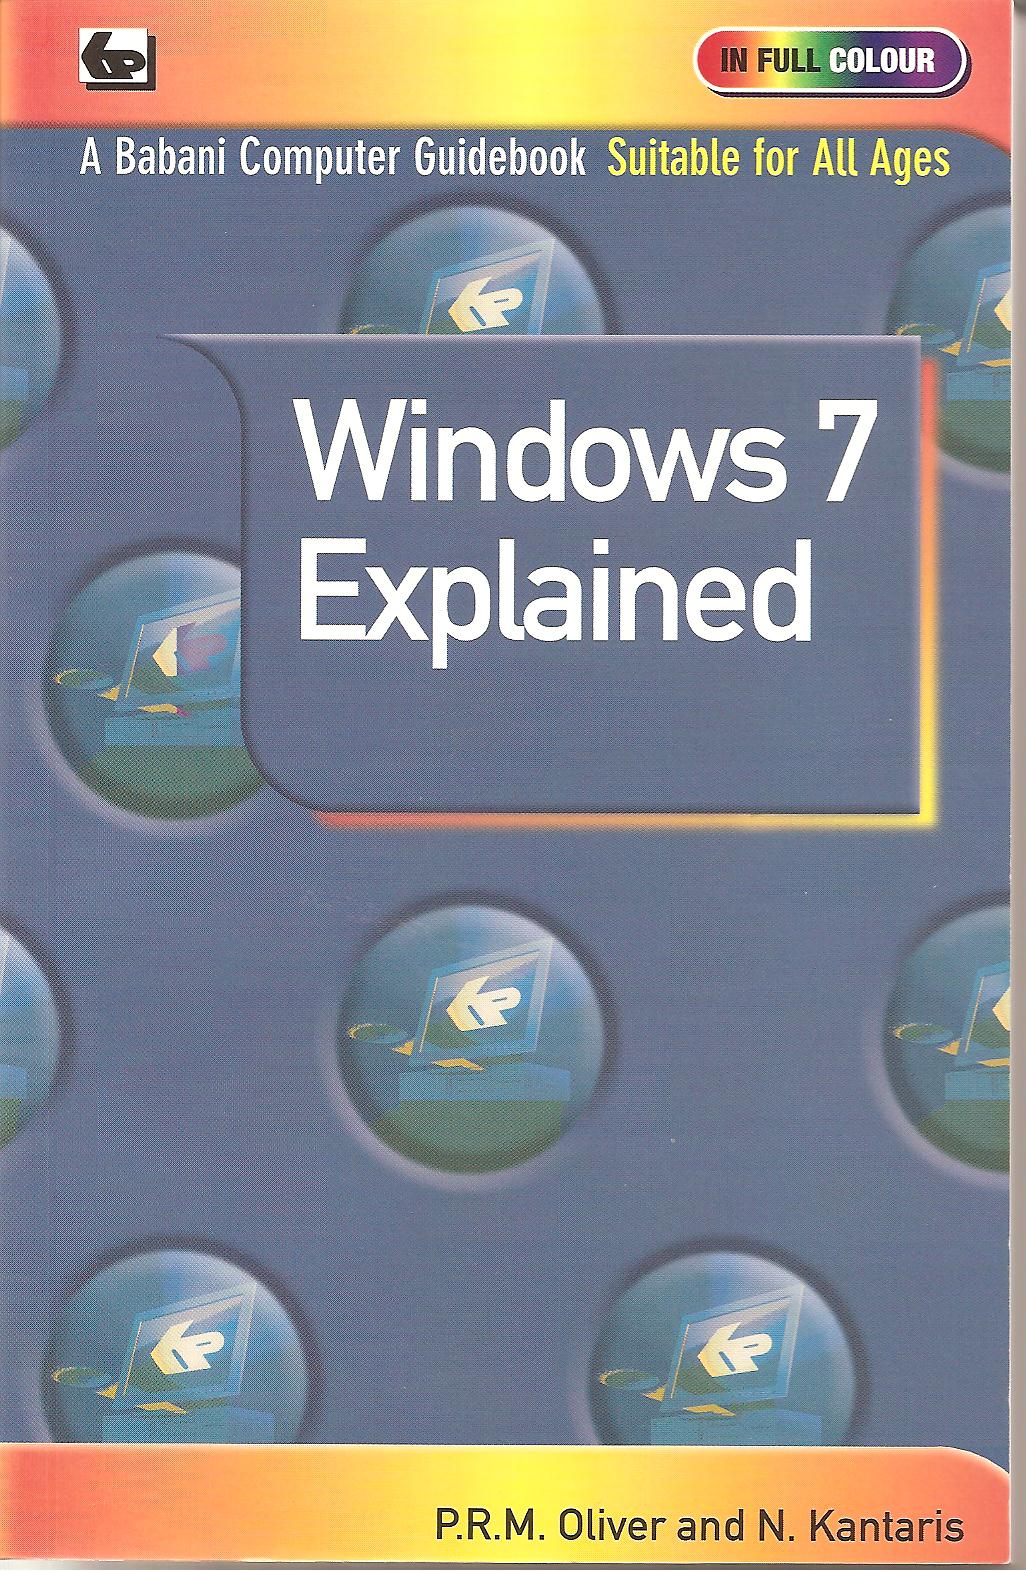 Windows 7 book front